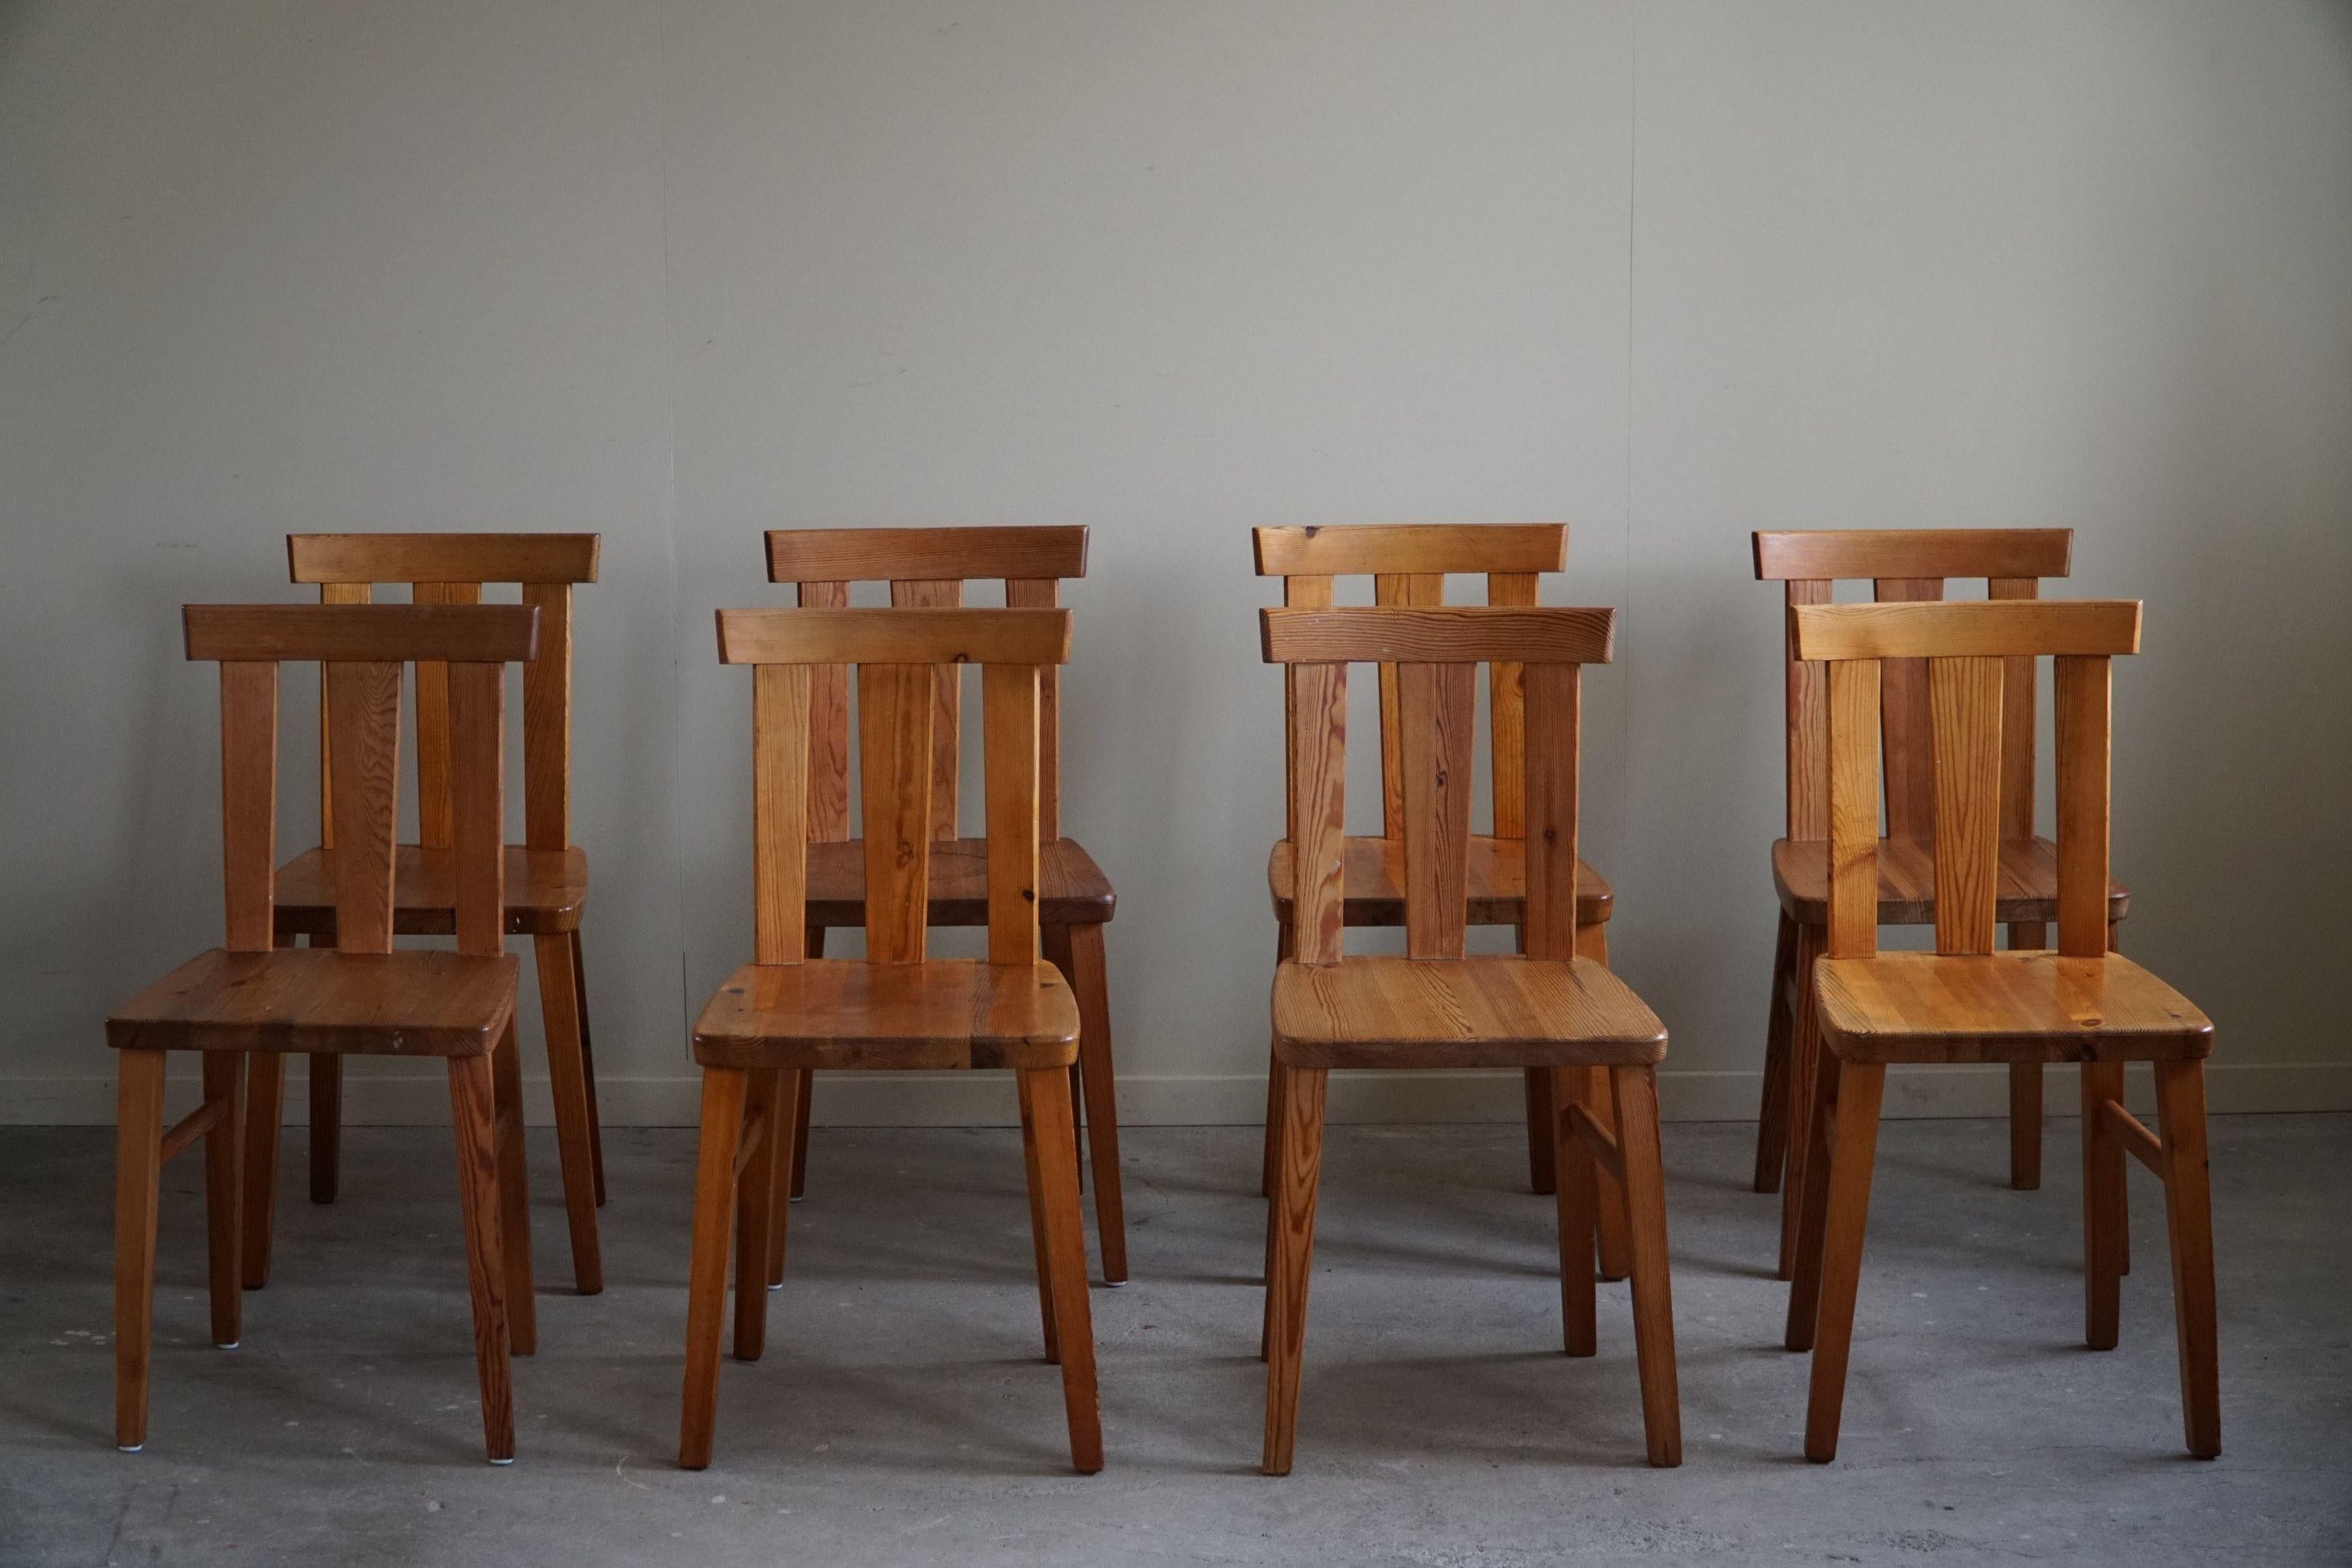 Hand-Crafted Swedish Modern, Set of 8 Chairs in Solid Pine, Axel Einar Hjorth Style, 1950s